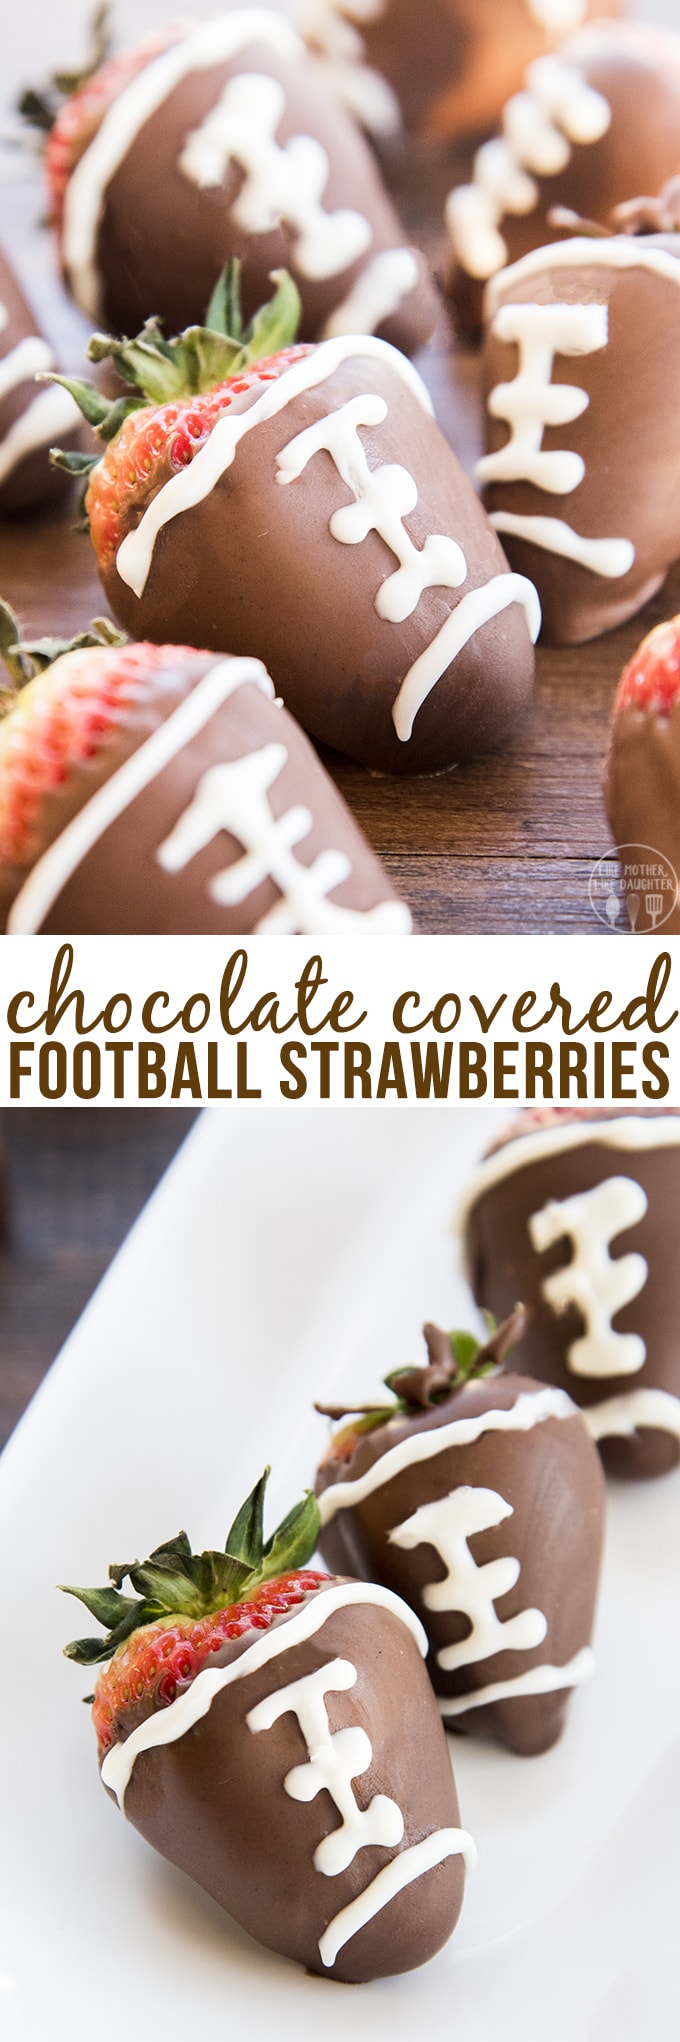 Chocolate covered football strawberries are not only easy to make, they're also delicious to eat and so cute for a football watching party!